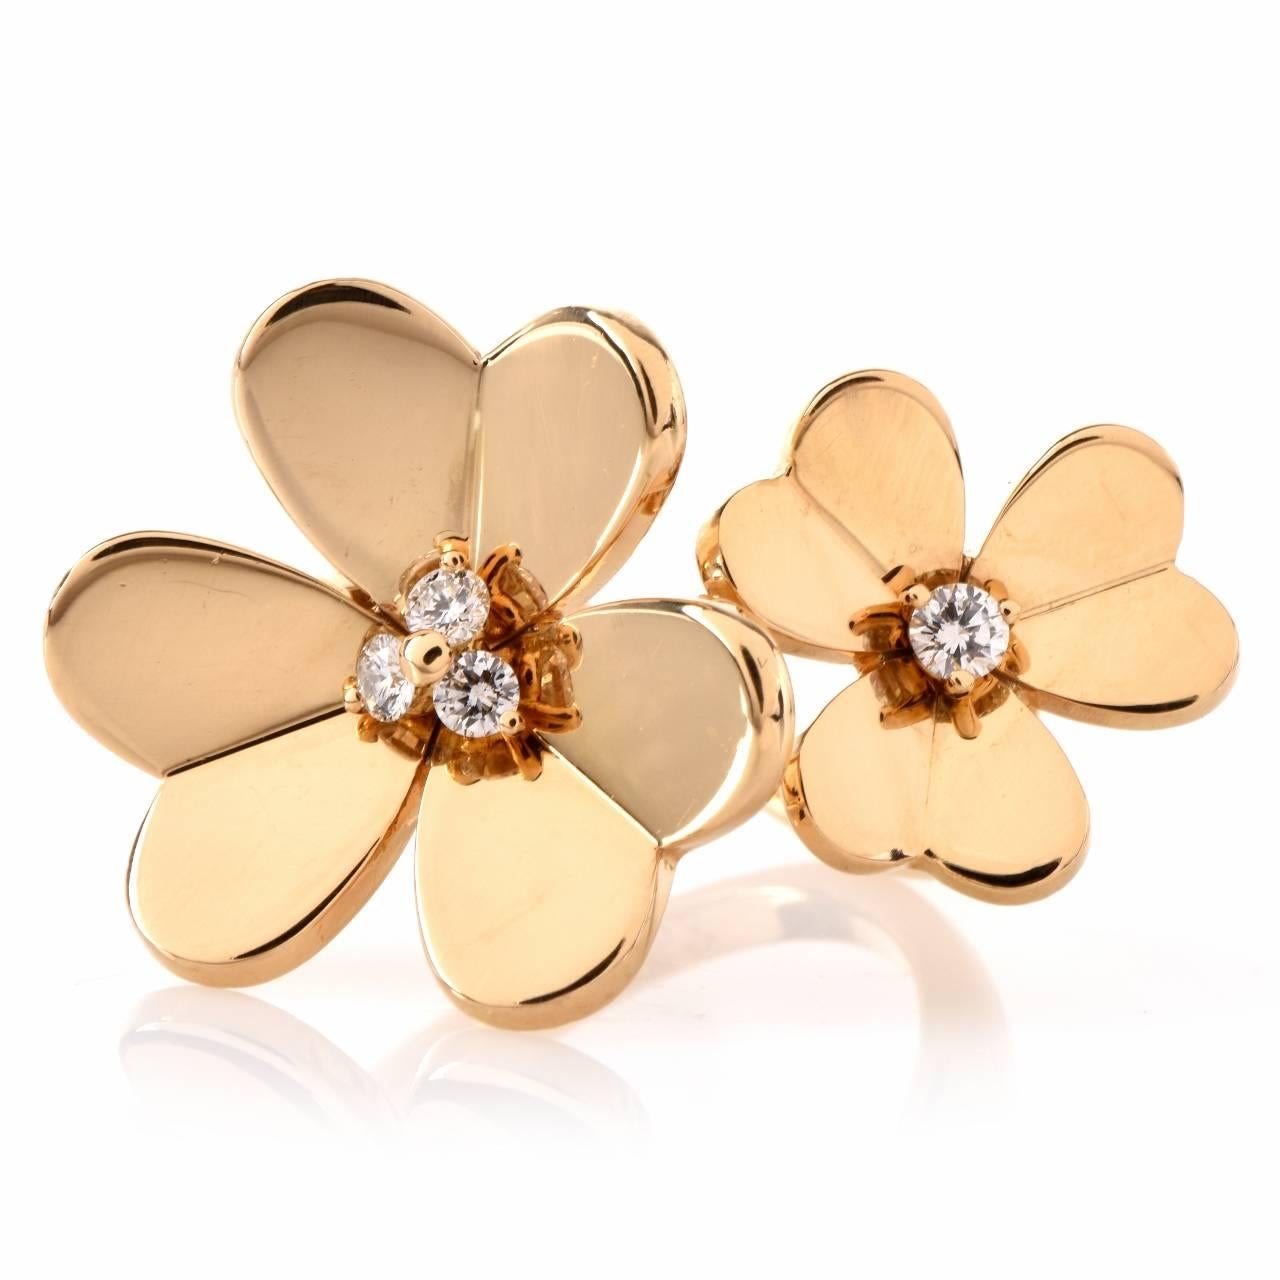 This Van Clef & Arpels ring of creative design and alluring floral motif is crafted in solid 18K yellow gold, designed as an open-end ring depicting a pair of botanically accurate, distinctly sized clovers. The enchanting 'symbols of good luck' for